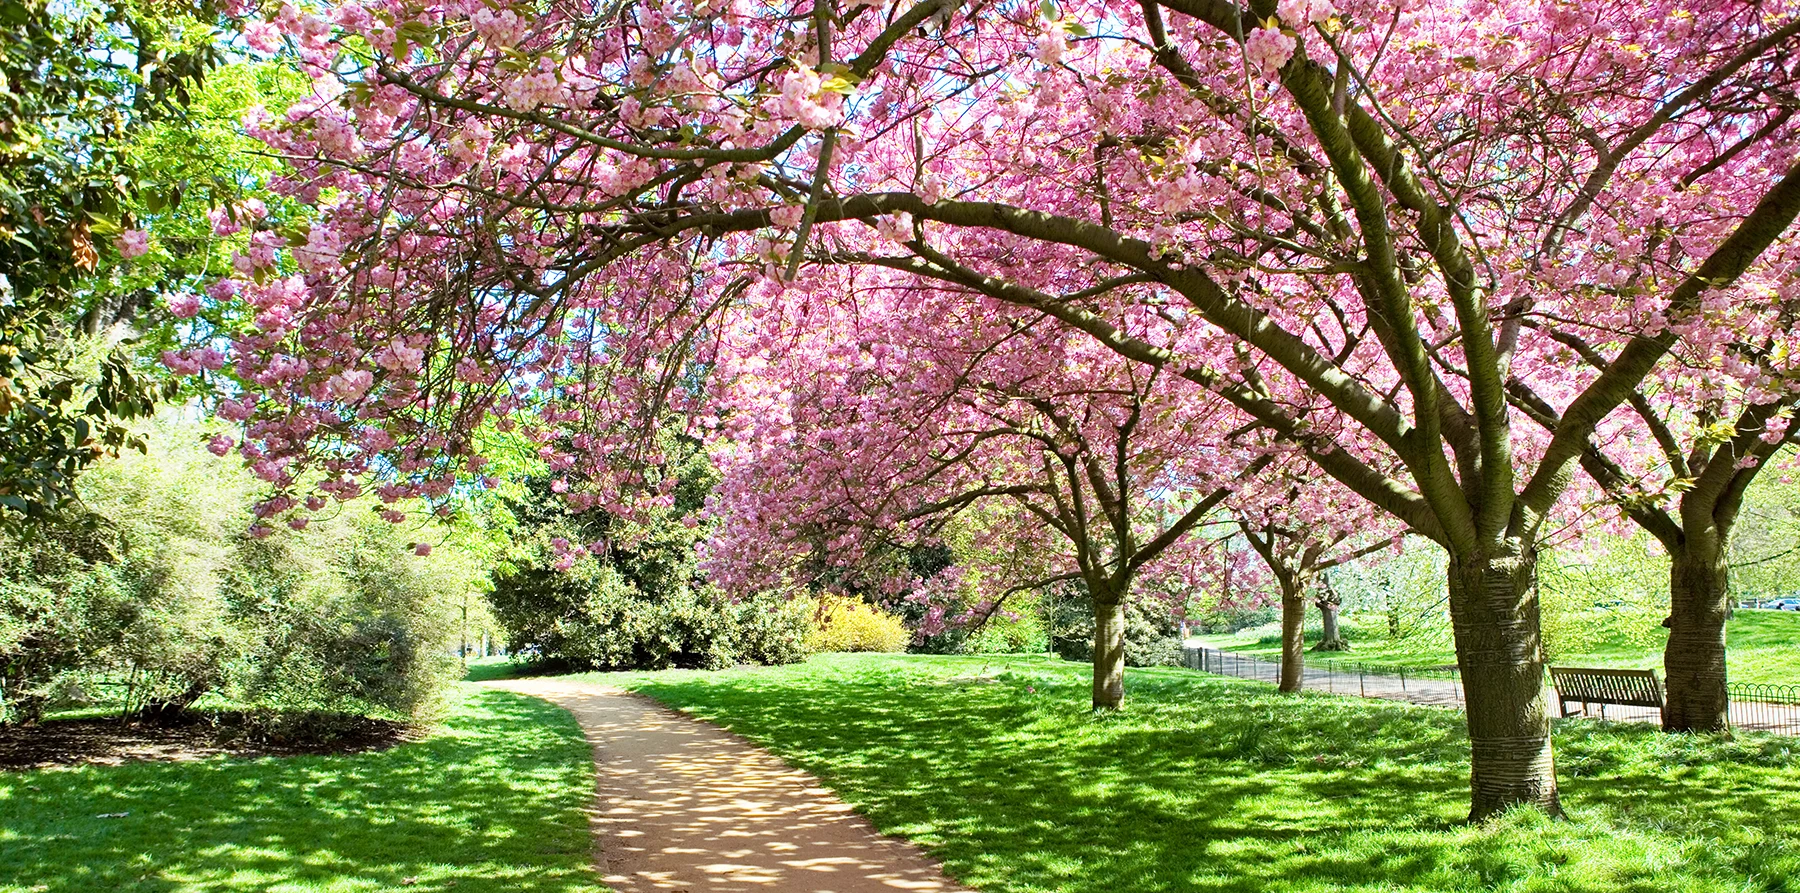 A path through Hyde Park in London, there are lots of trees with pink blossom overhanging the path and causing dappled shadows on the grass and path. 